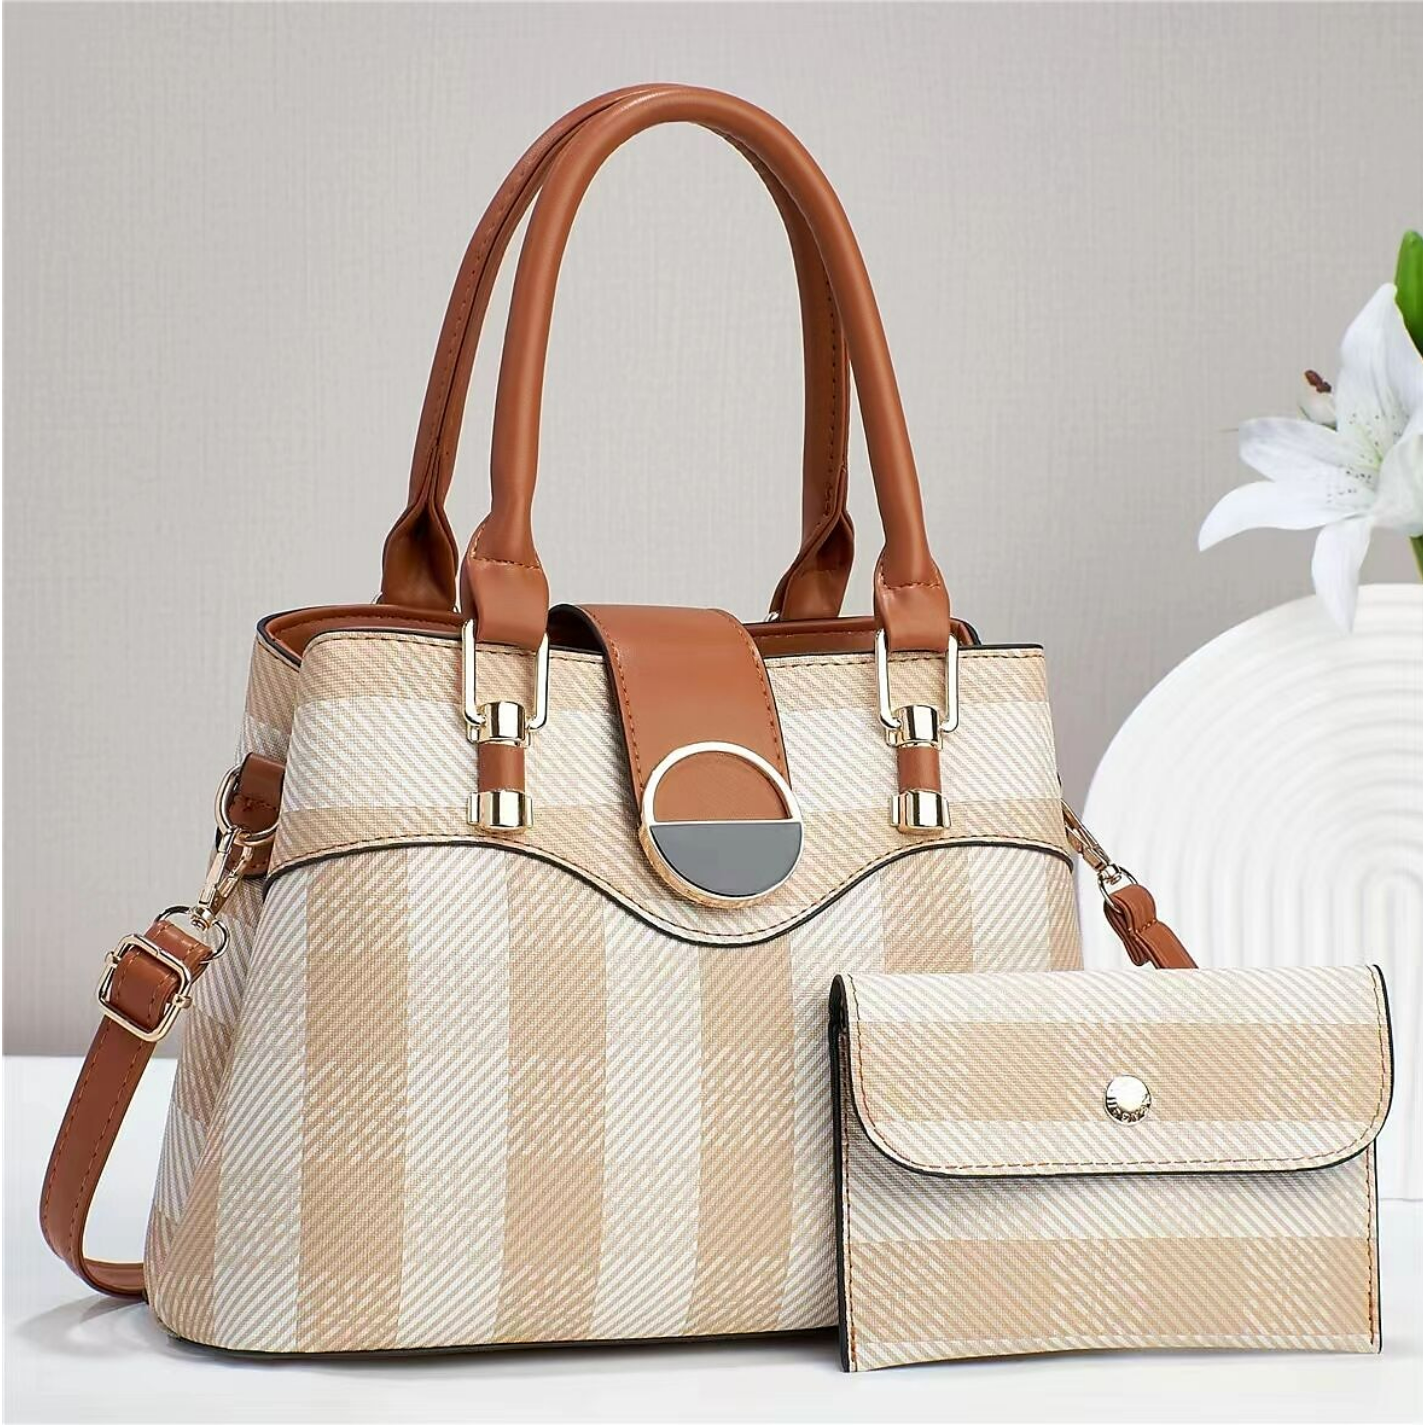 Women's Handbag Shoulder Bag PU Leather Shopping Daily Buttons Large Capacity Plaid Earth Yellow Black Pink